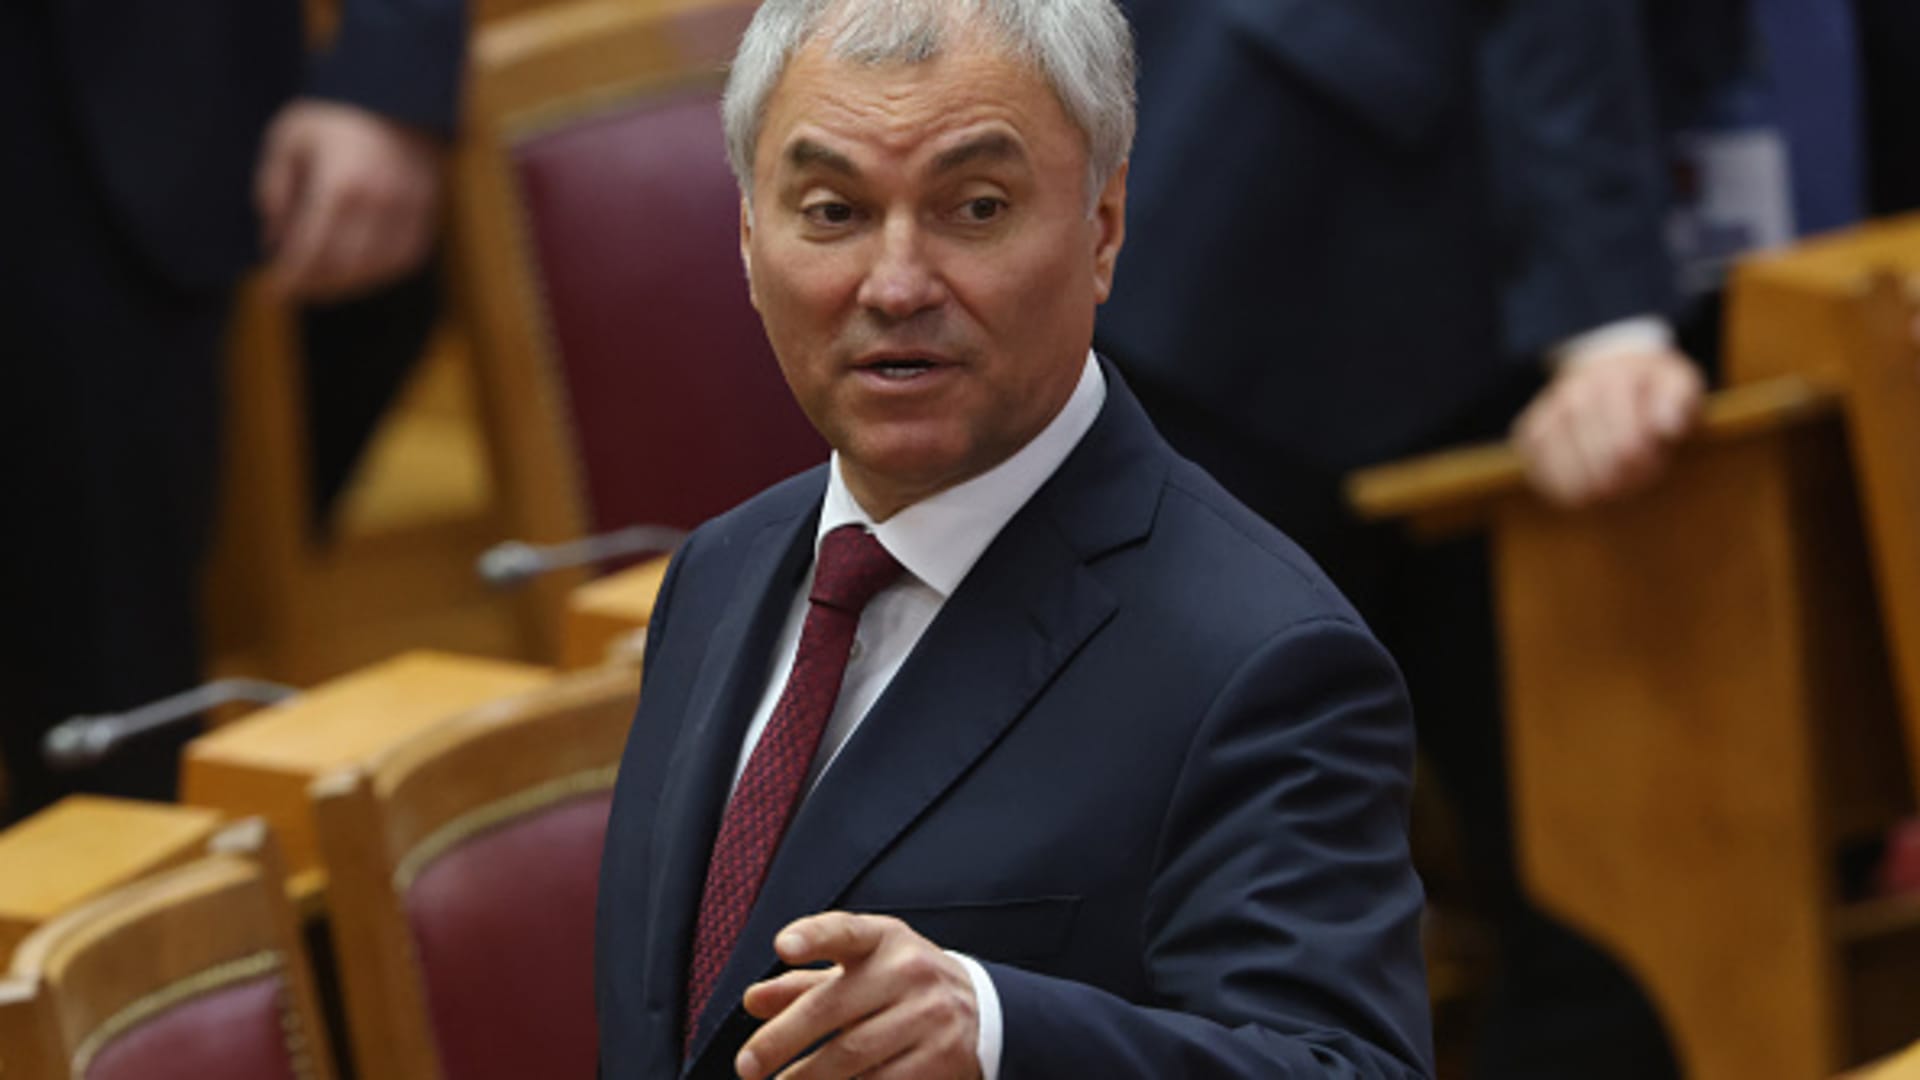 Russian State Duma chairman, Vyacheslav Volodin, at the Council of Lawmakers annual plenary session on April 27, 2023, in St. Petersburg, Russia.